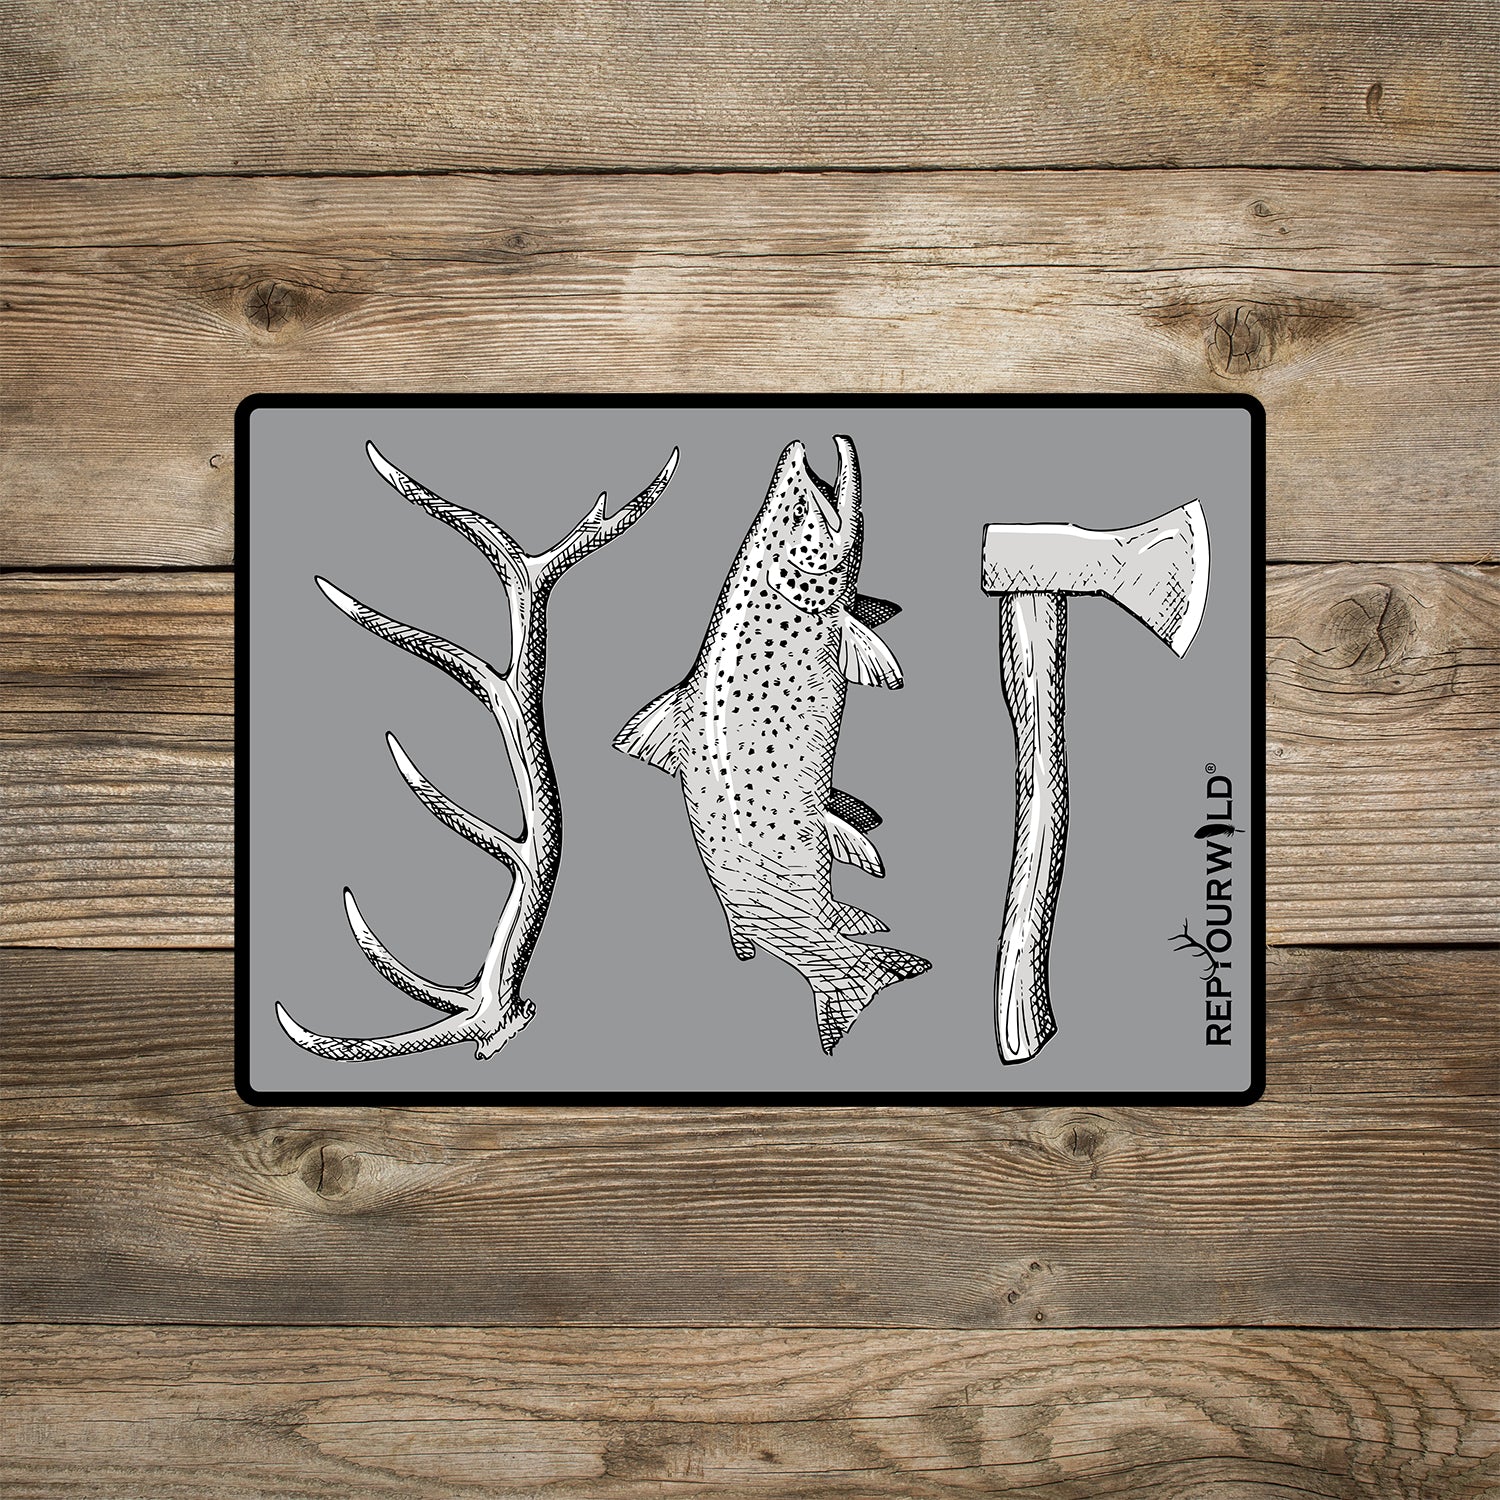 A gray rectangular sticker shown on a wood background. The sticker features an elk antler, a trout and a hatchet.